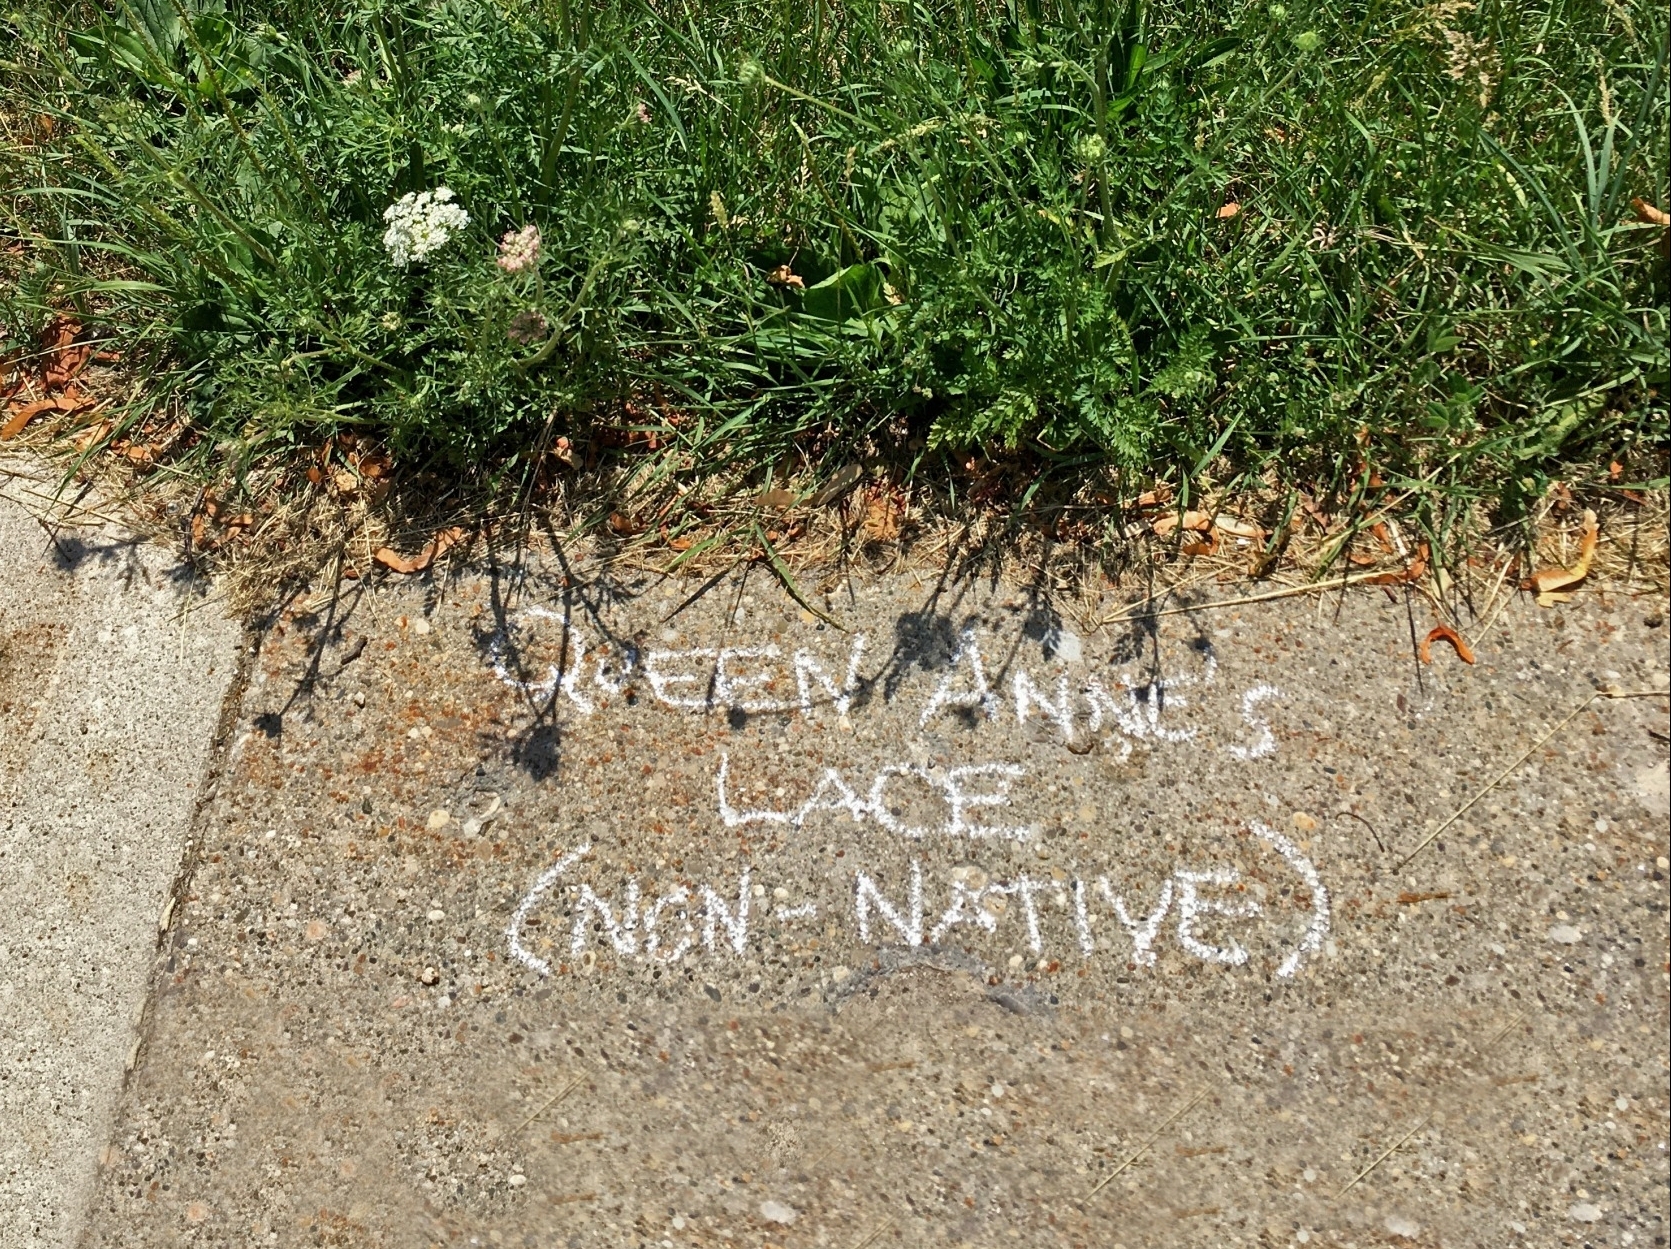 Chalk writing on pavement identifying Queen Anne's Lace as an exotic species